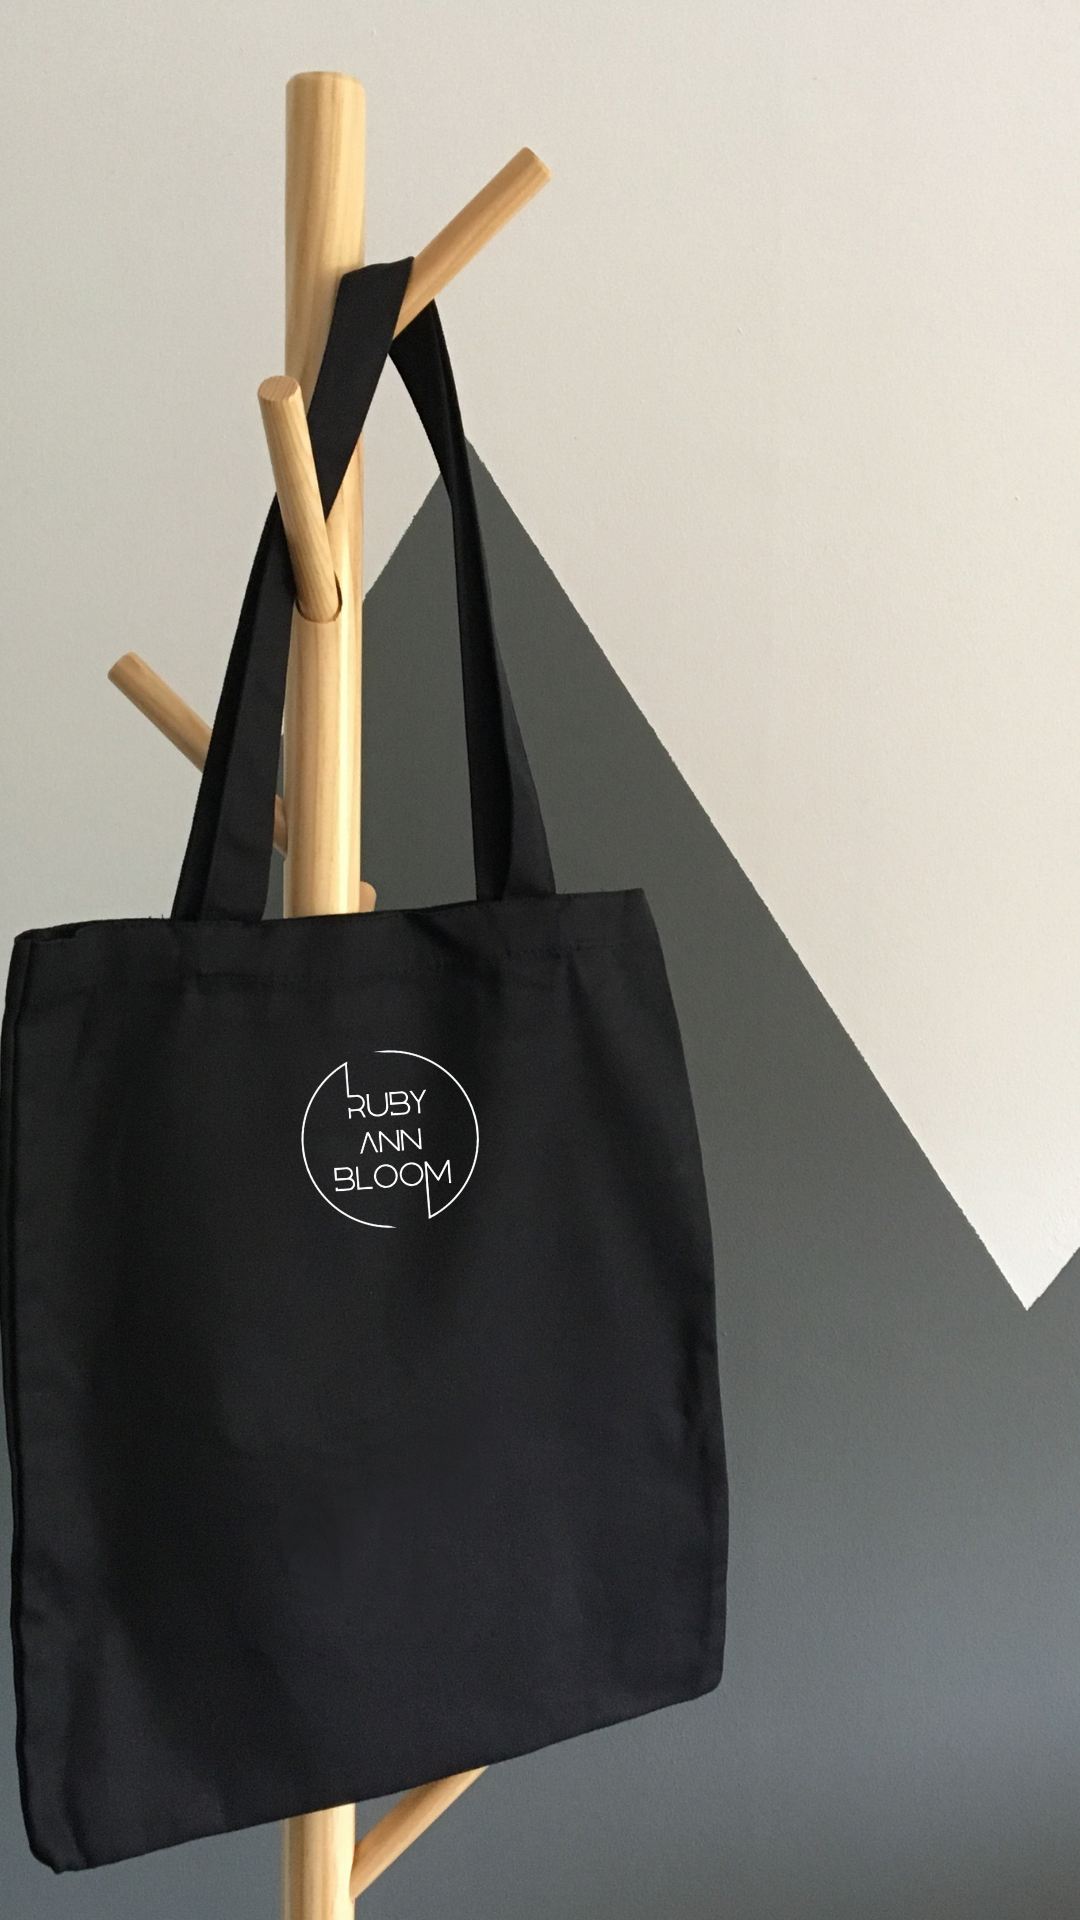 ‘Almost Over, Just Begun’ Tote Bag